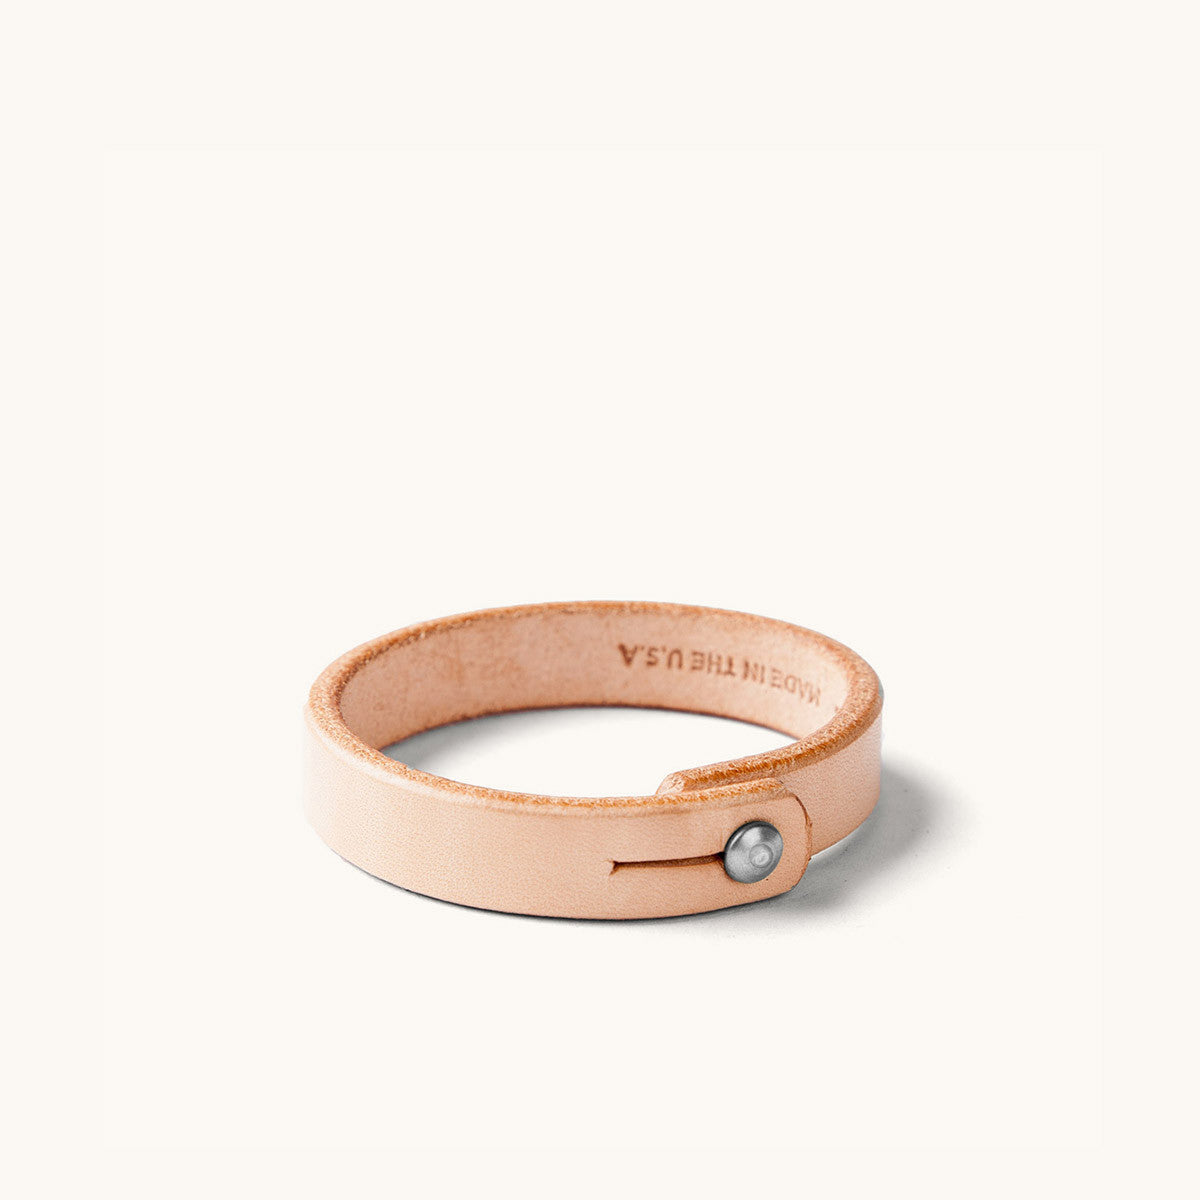 Natural leather wristband with metal rivet closure.